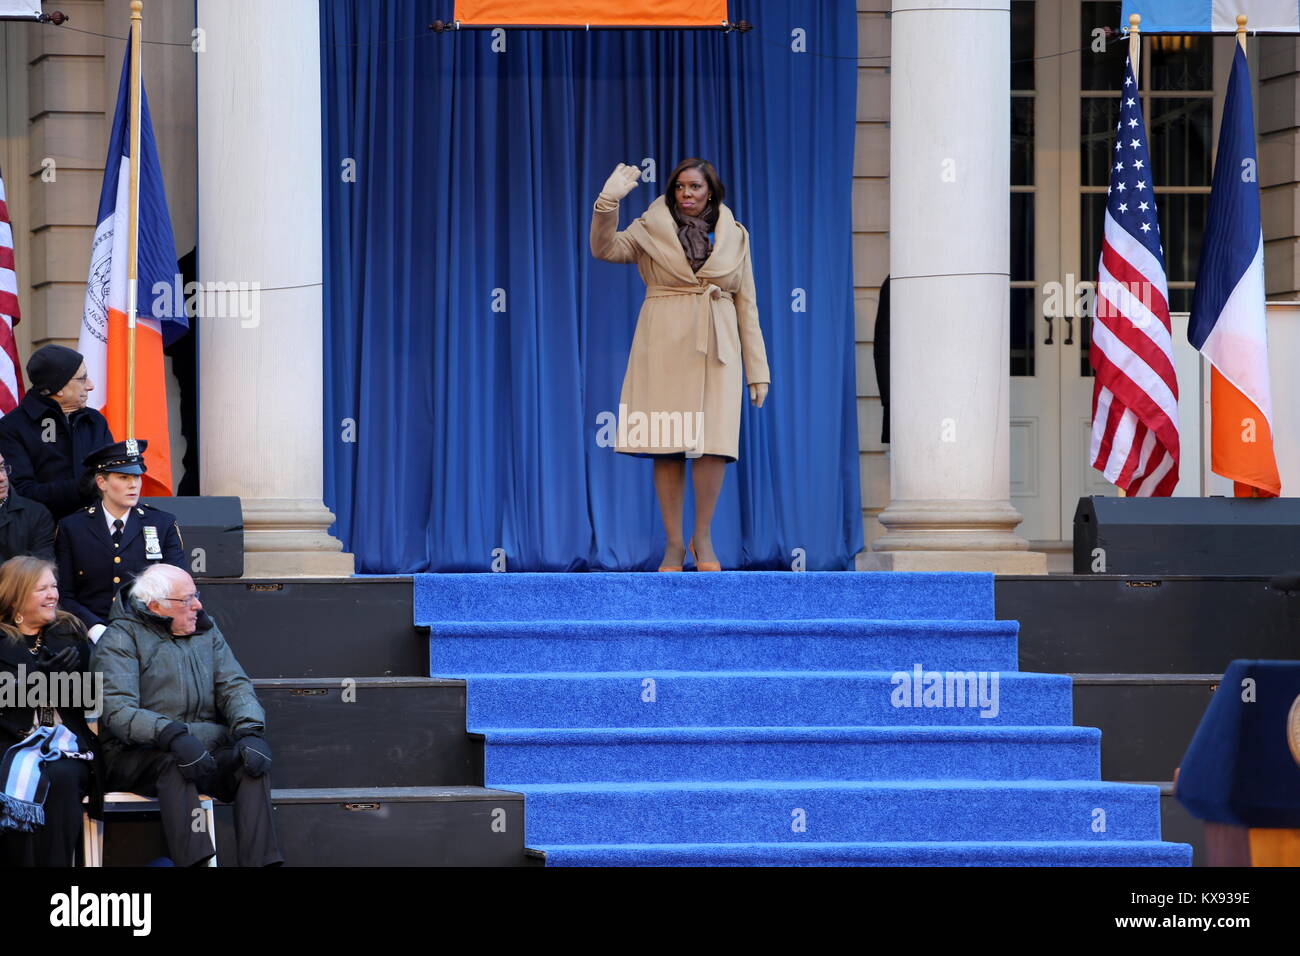 New Year 2018: Mayor De Blasio Sworn In For Second Term At City Hall Ceremony Stock Photo